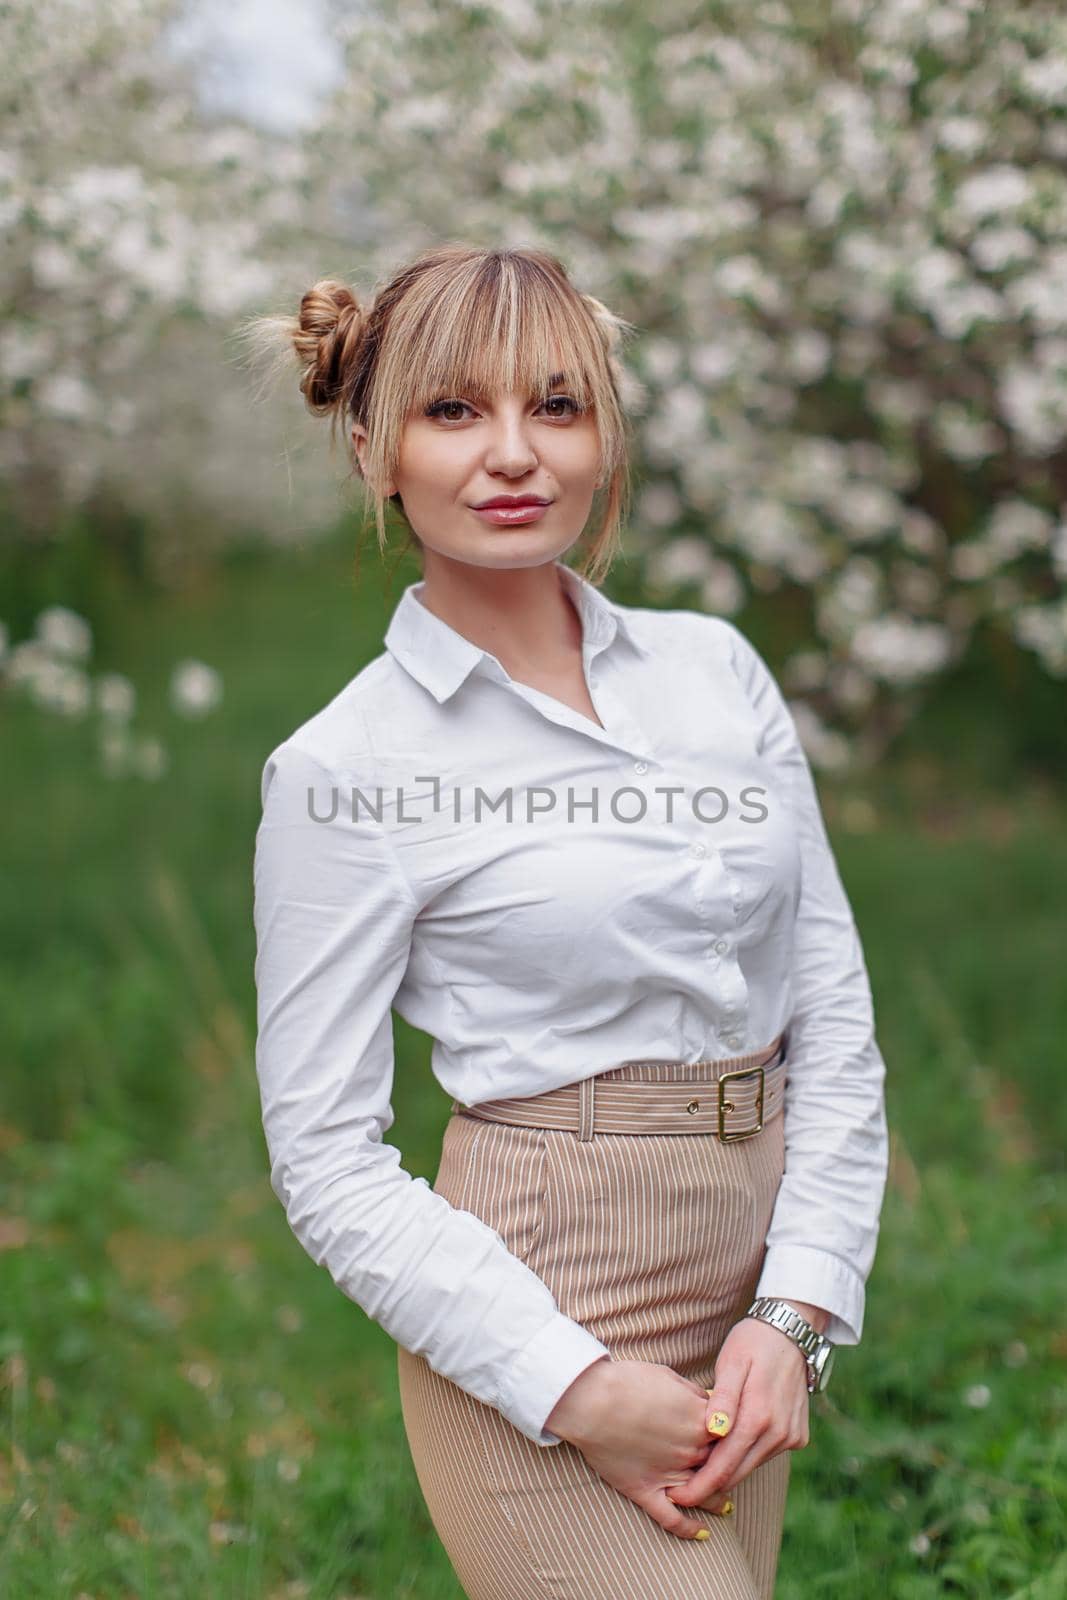 Beautiful young blonde woman in white shirt posing under apple tree in blossom and green grass in Spring garden